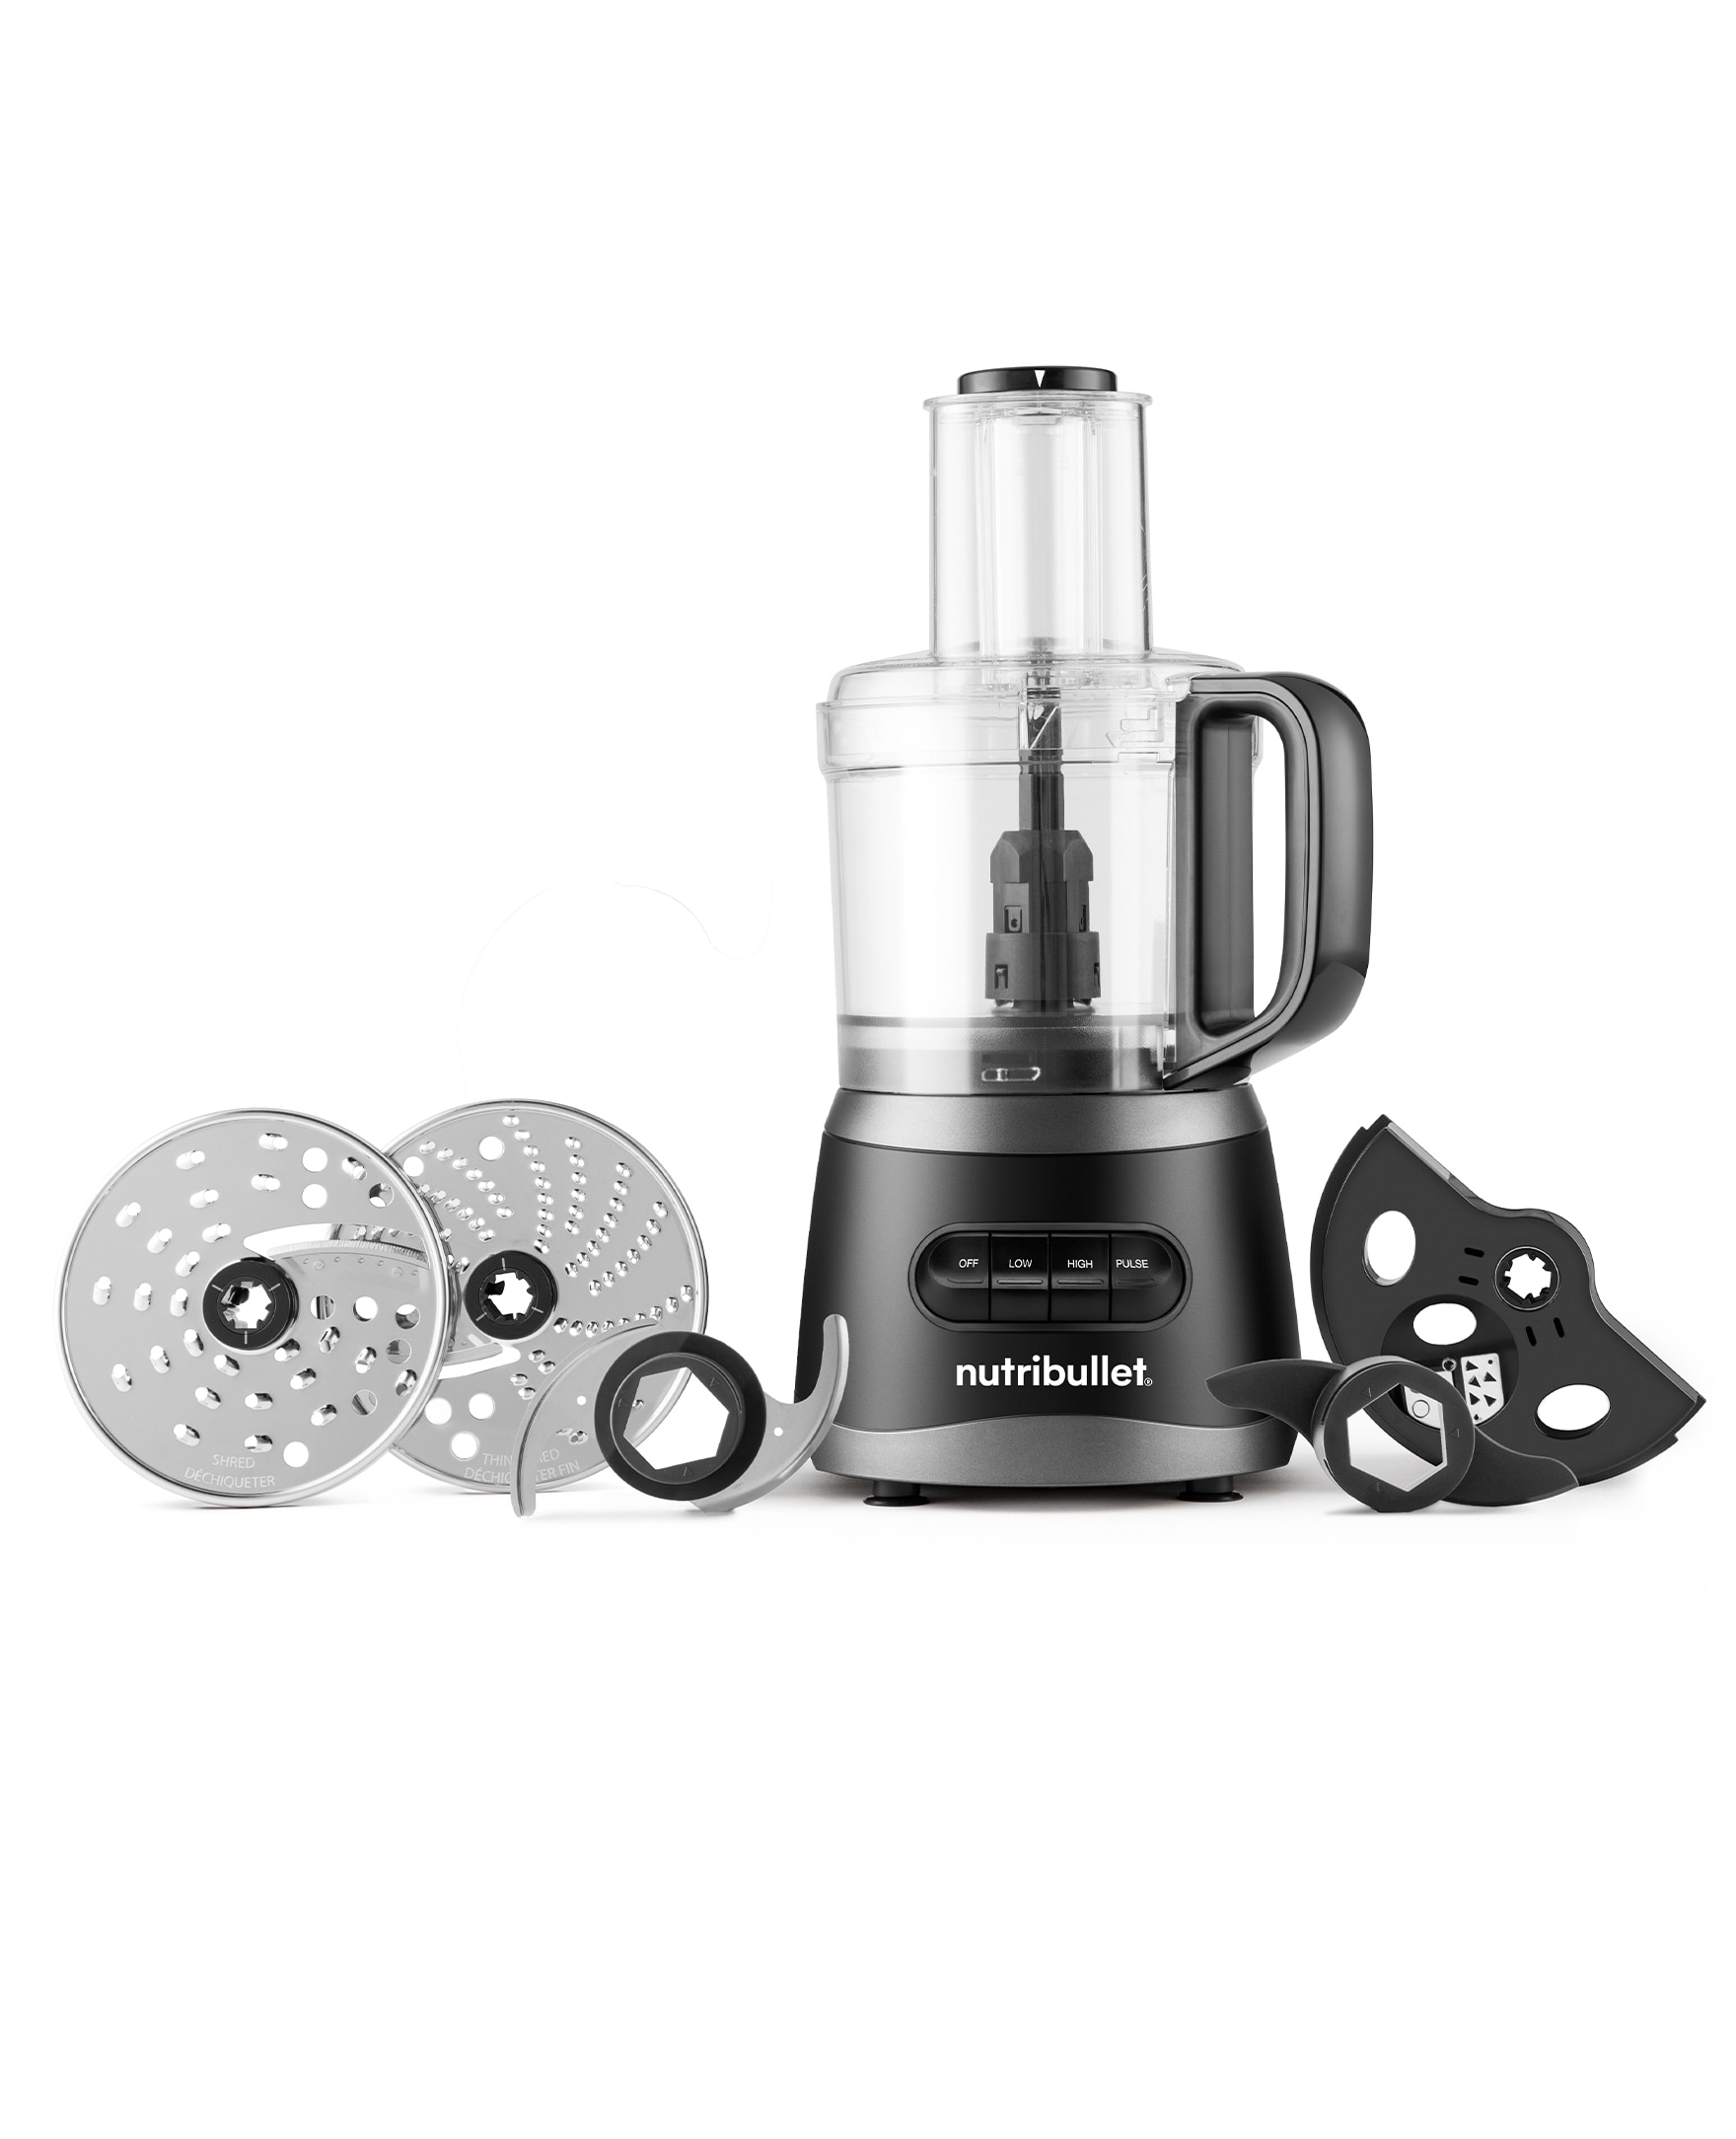 VEVOR Food Processor 7-Cup Vegetable Chopper for Chopping Mixing Slicing and Kneading Dough 350 Watts Stainless Steel Blade Professional Electric